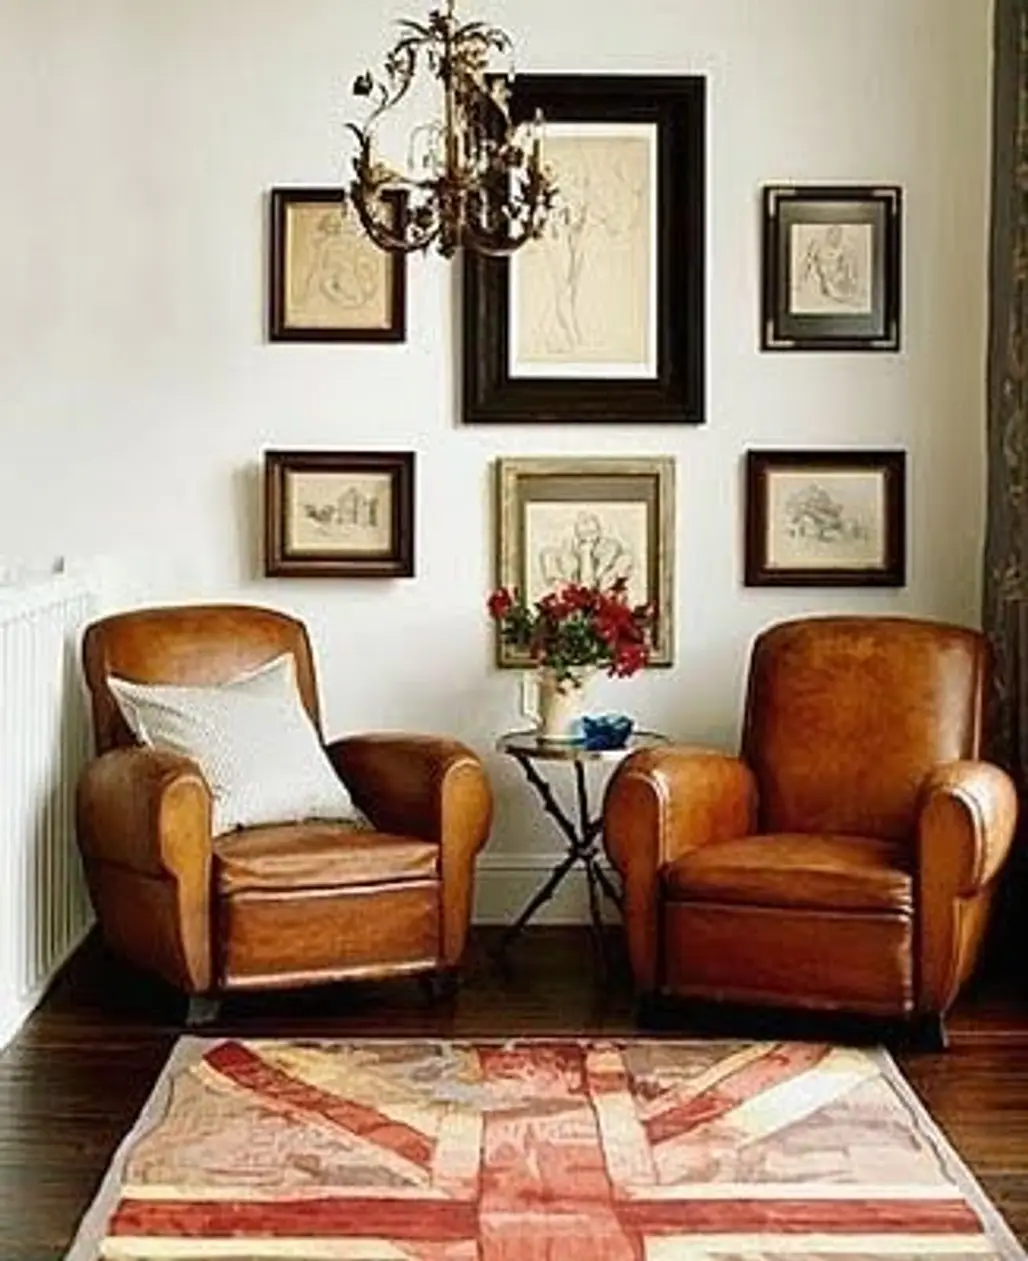 Leather Club Chairs